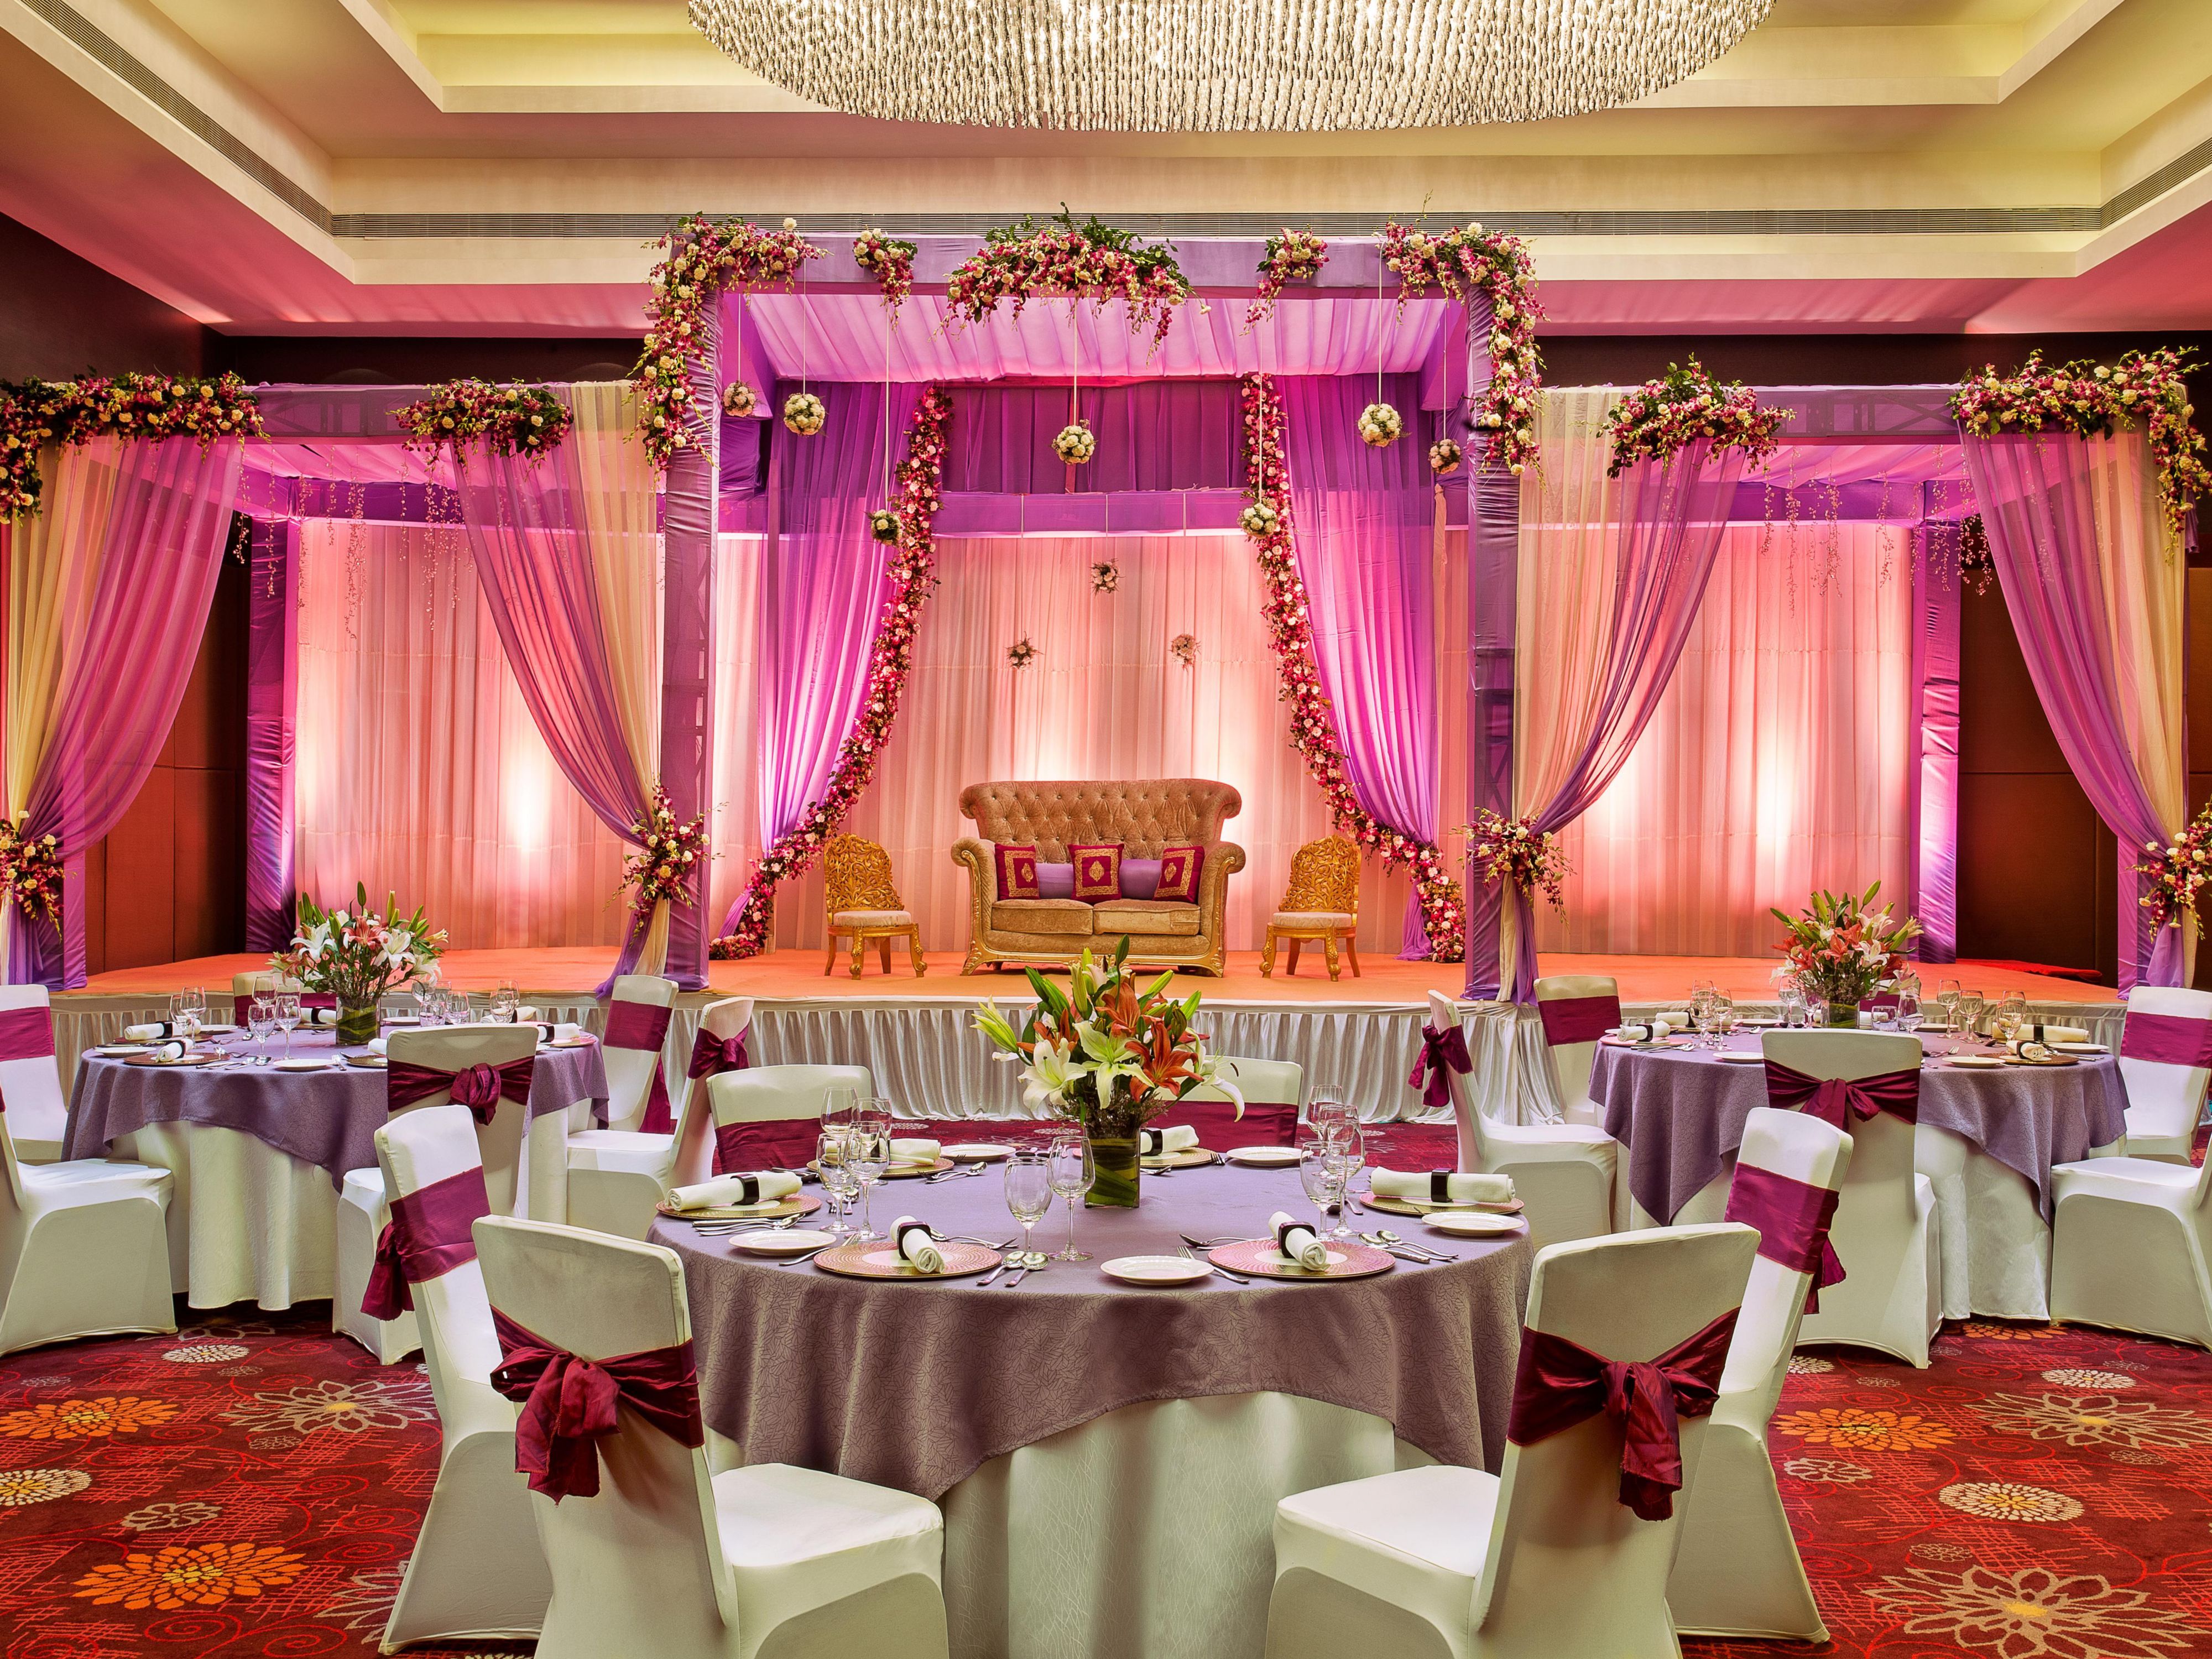 We love making your dream of a grandiose celebration come true. Whether your guest list is extensive or intimate, the hotel's 10,000 sq. ft event area allows you to host celebrations of varying scale and size. From extravagant buffets to live stations, featuring Marwari or Gujarati cuisine, the chefs here will custom create your menus.